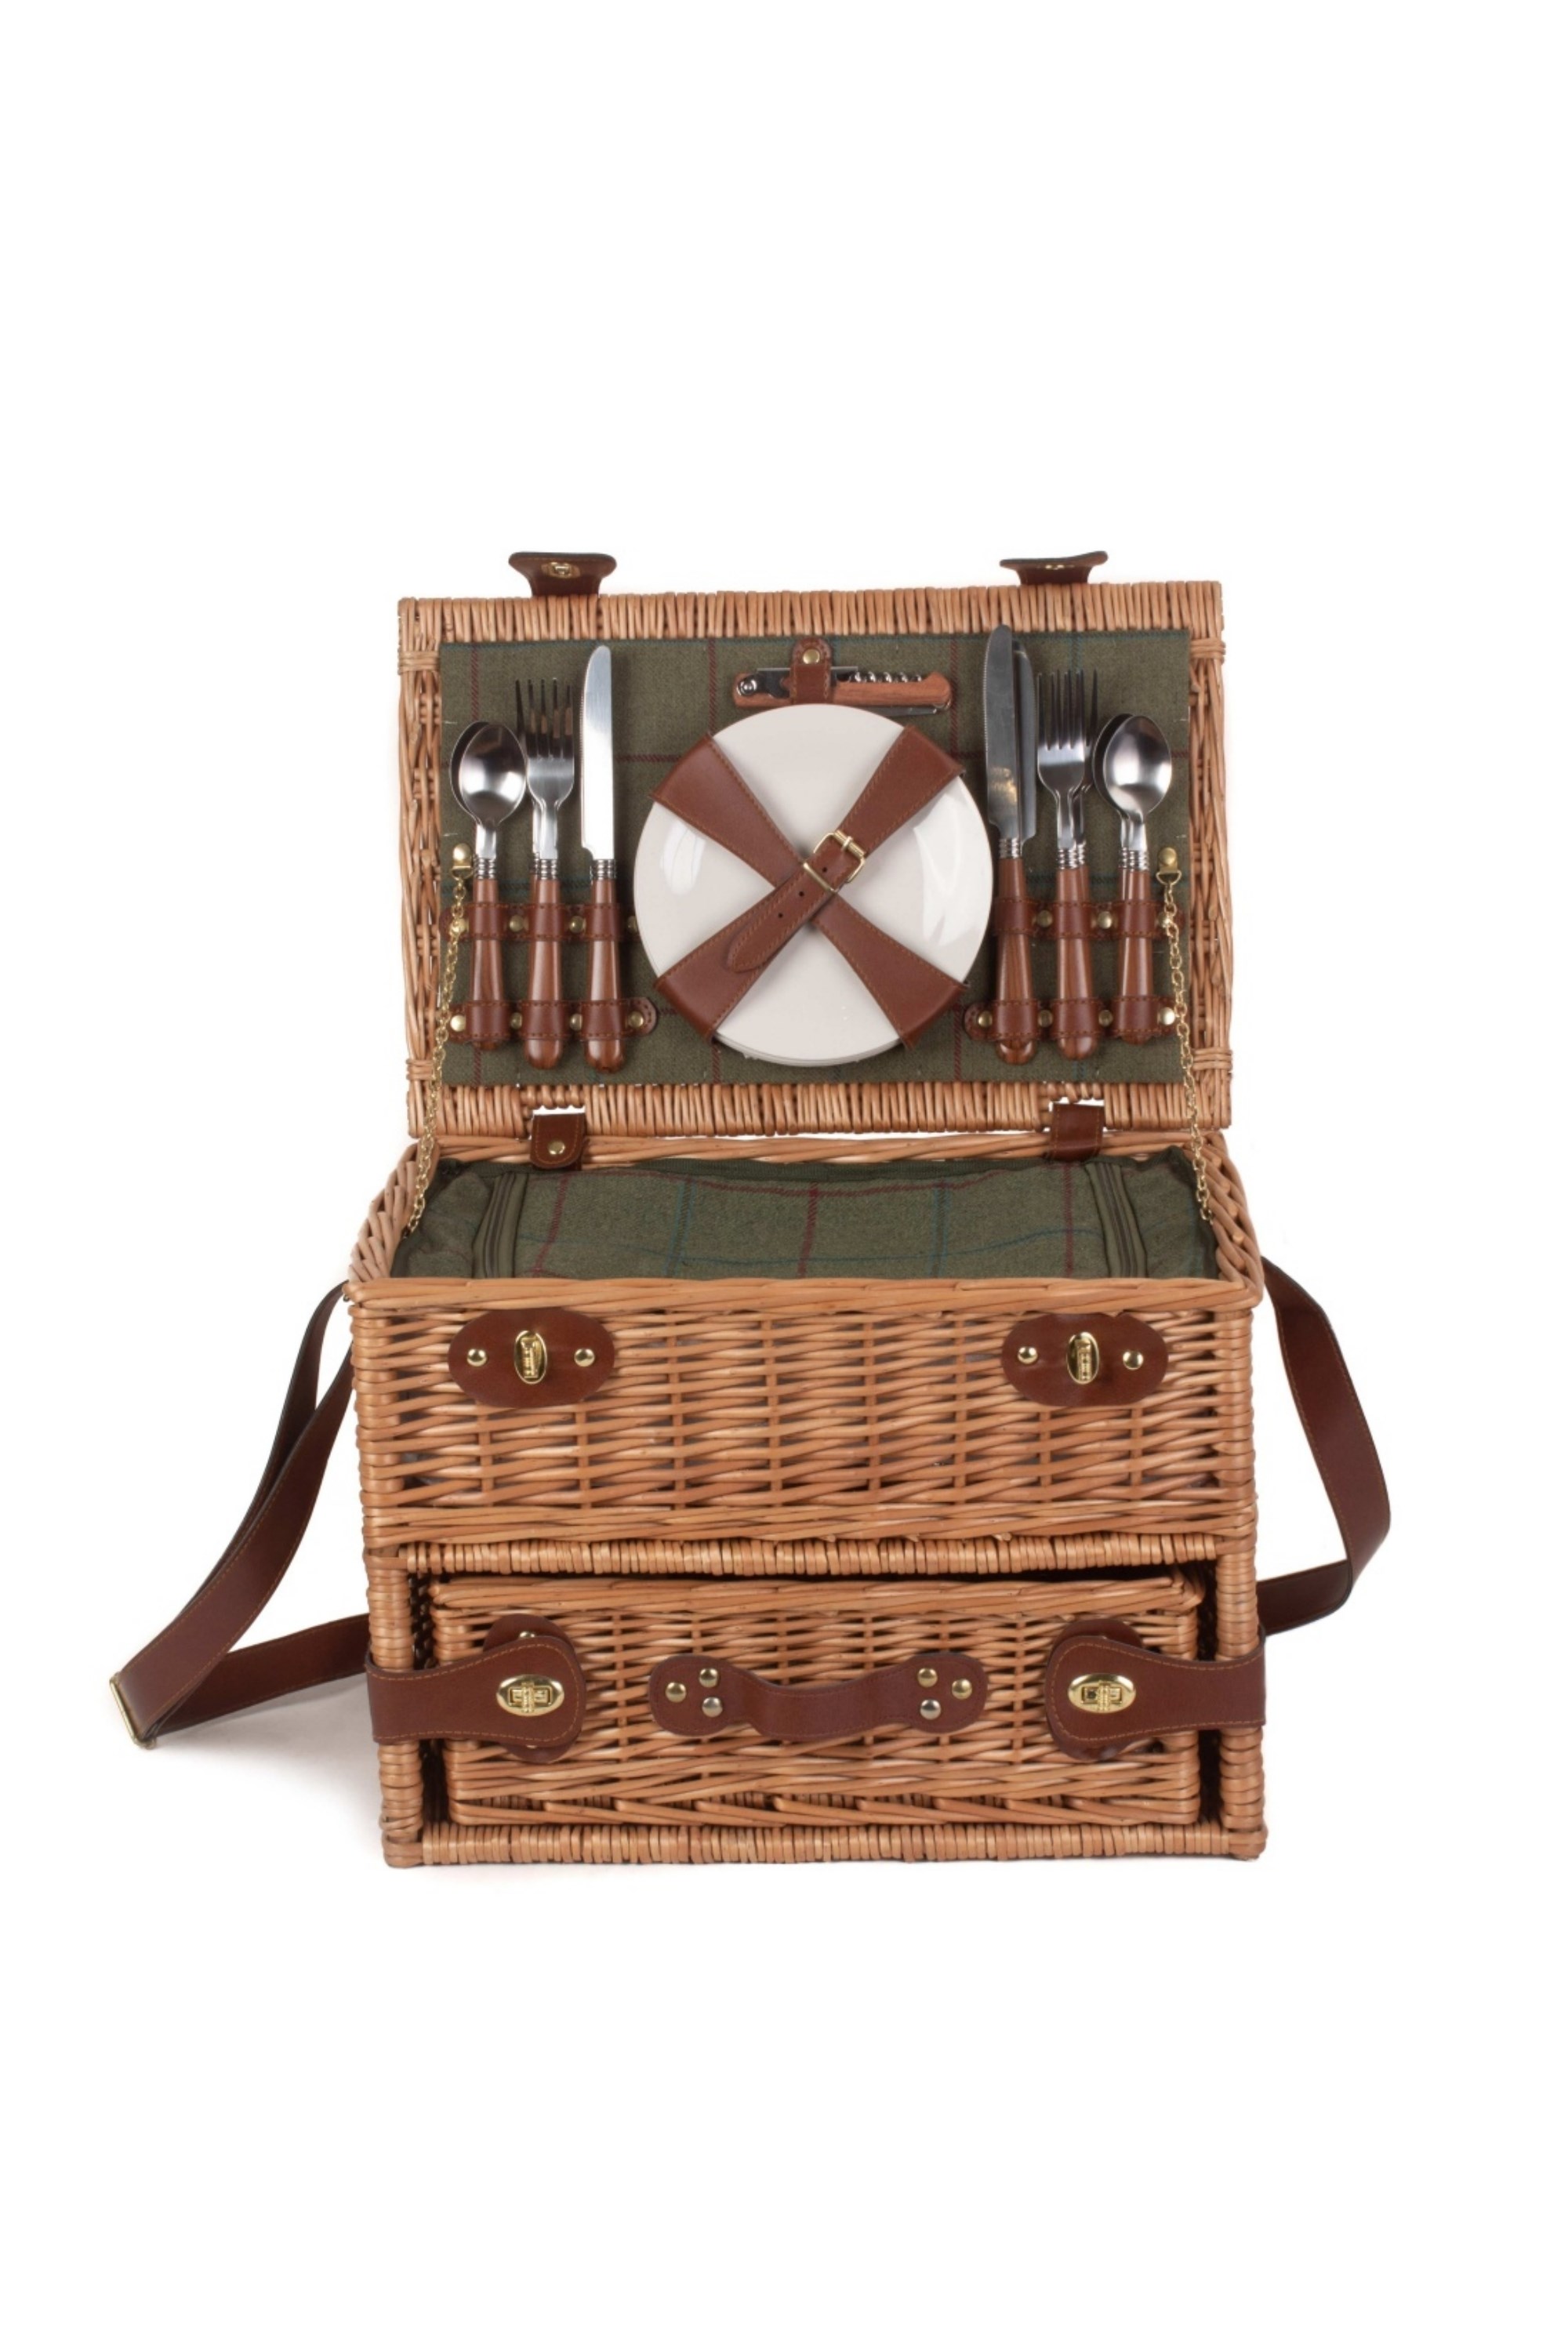 4 Person Fitted Picnic Basket With Drawers -